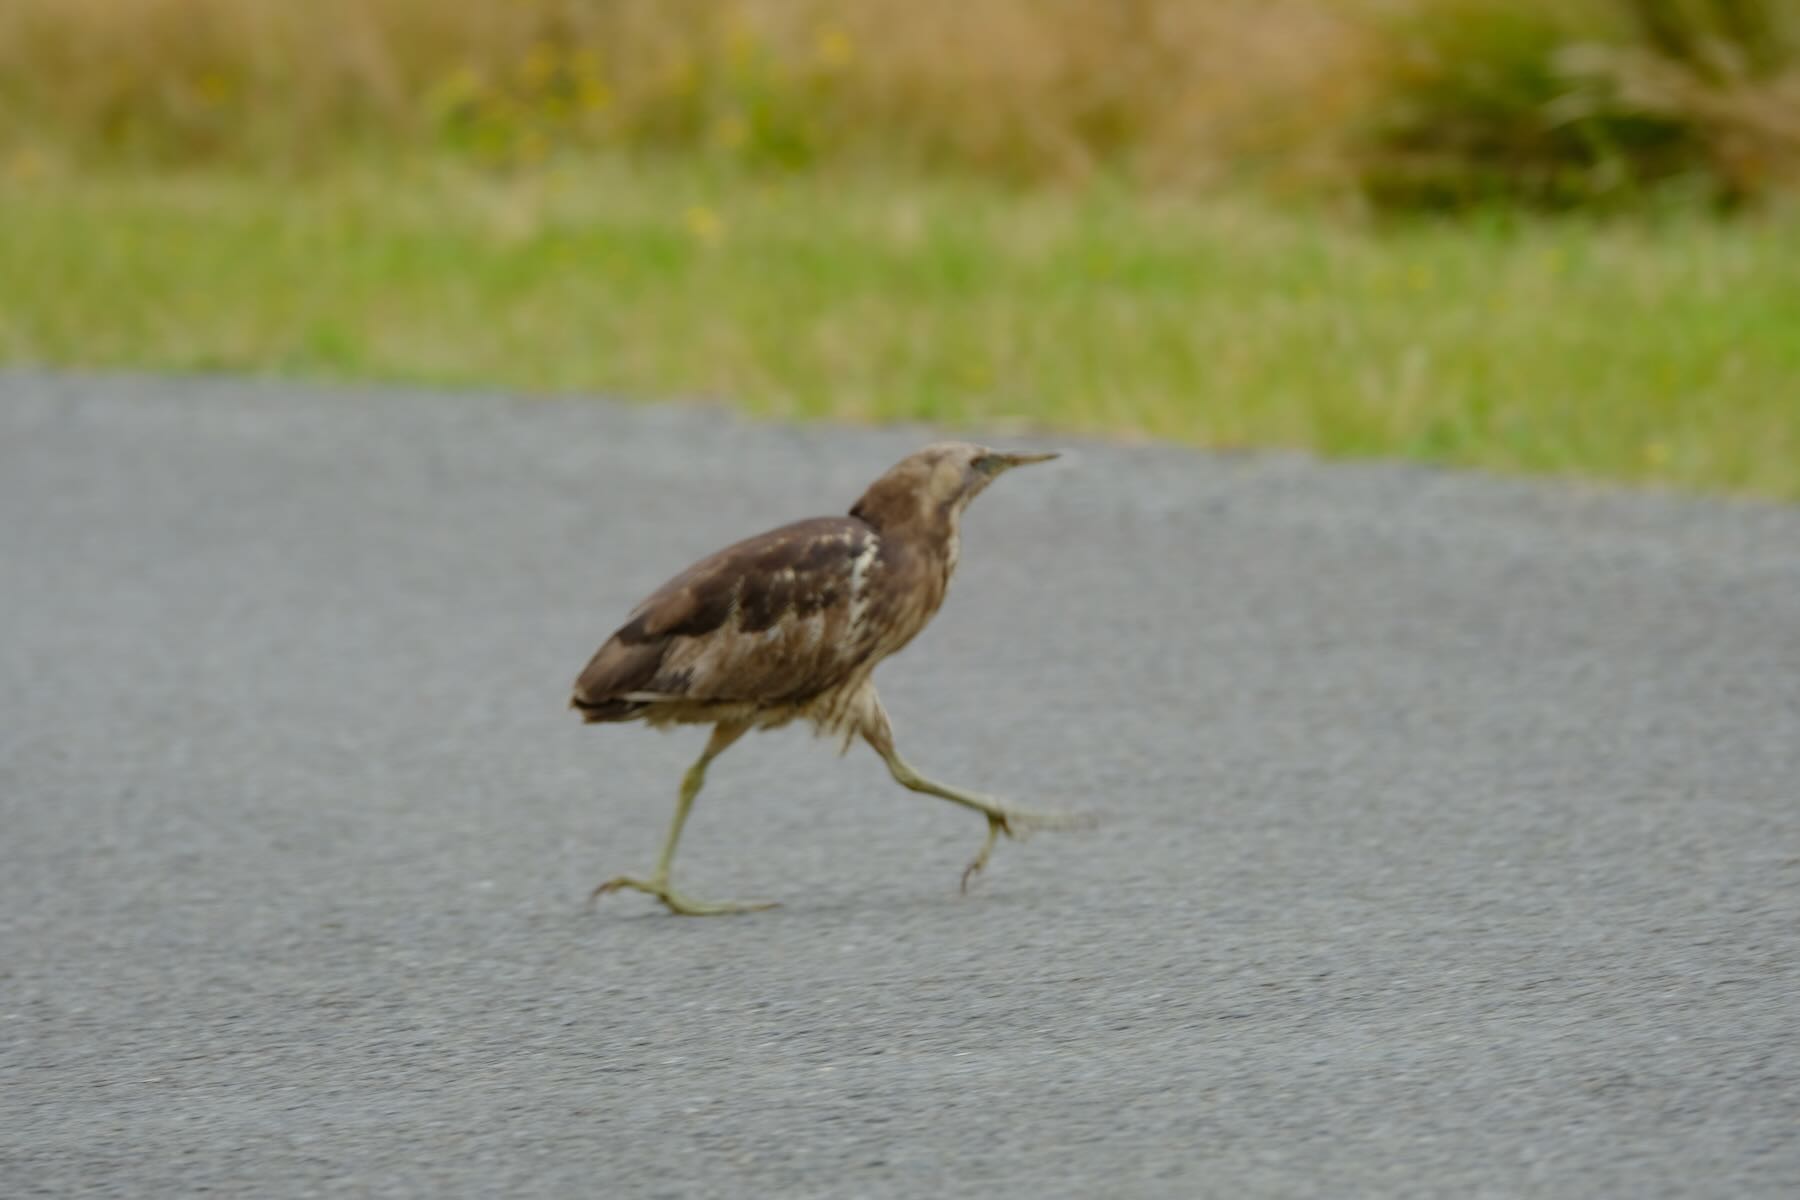 Large striped bird with beet feet crossing the road. 